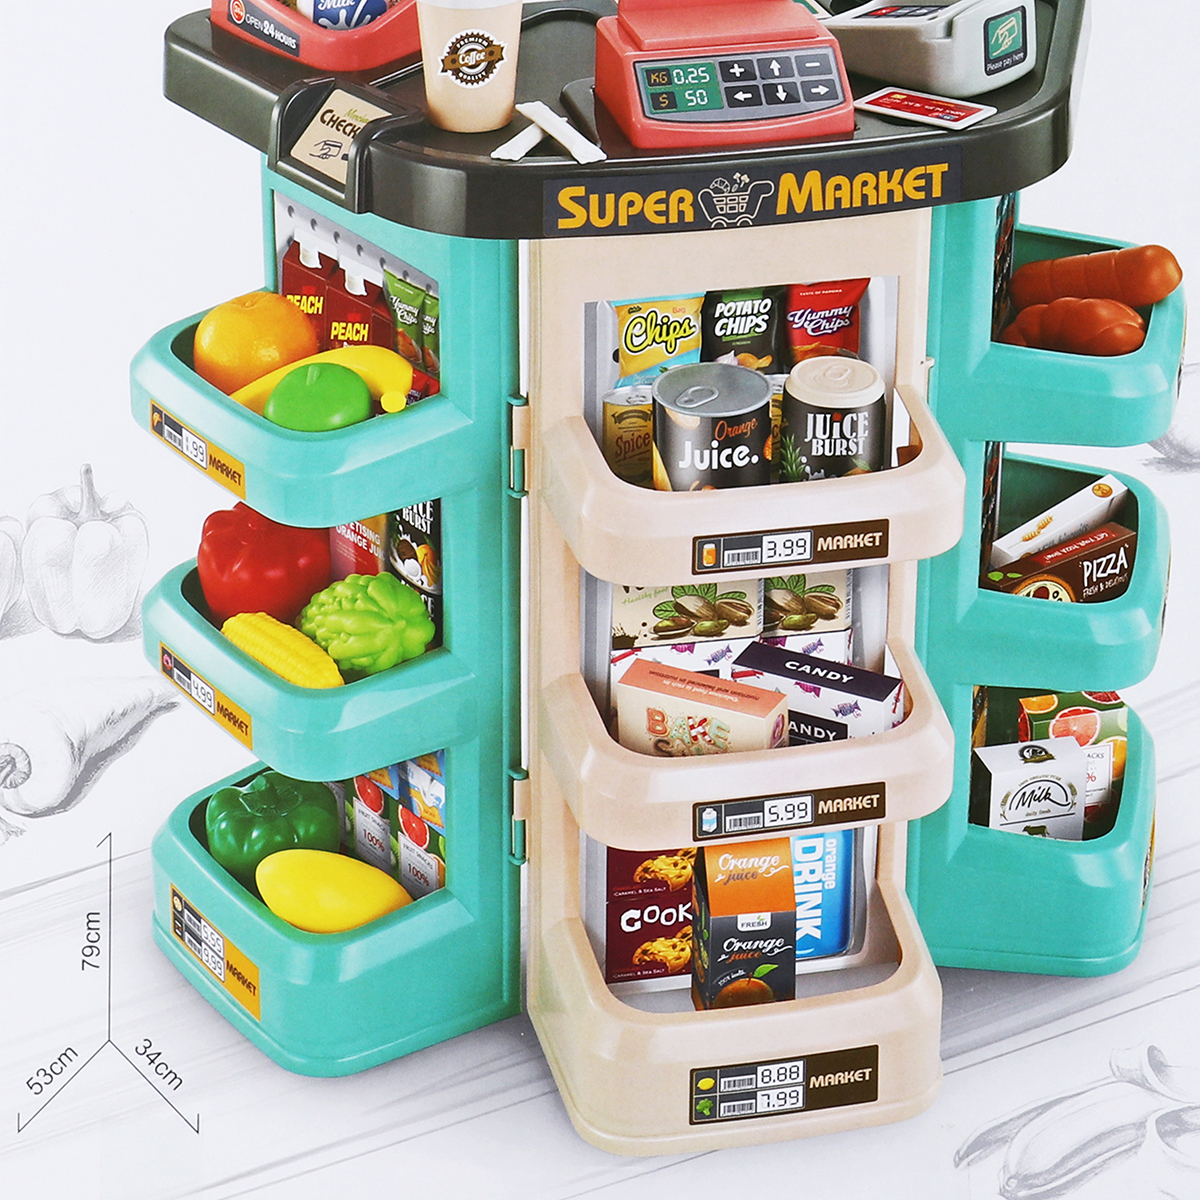 Children-Play-House-Kitchen-Simulation-Toys-Scanner-Credit-Card-Machine-Trolley-Shopping-Trolley-Cas-1635566-3